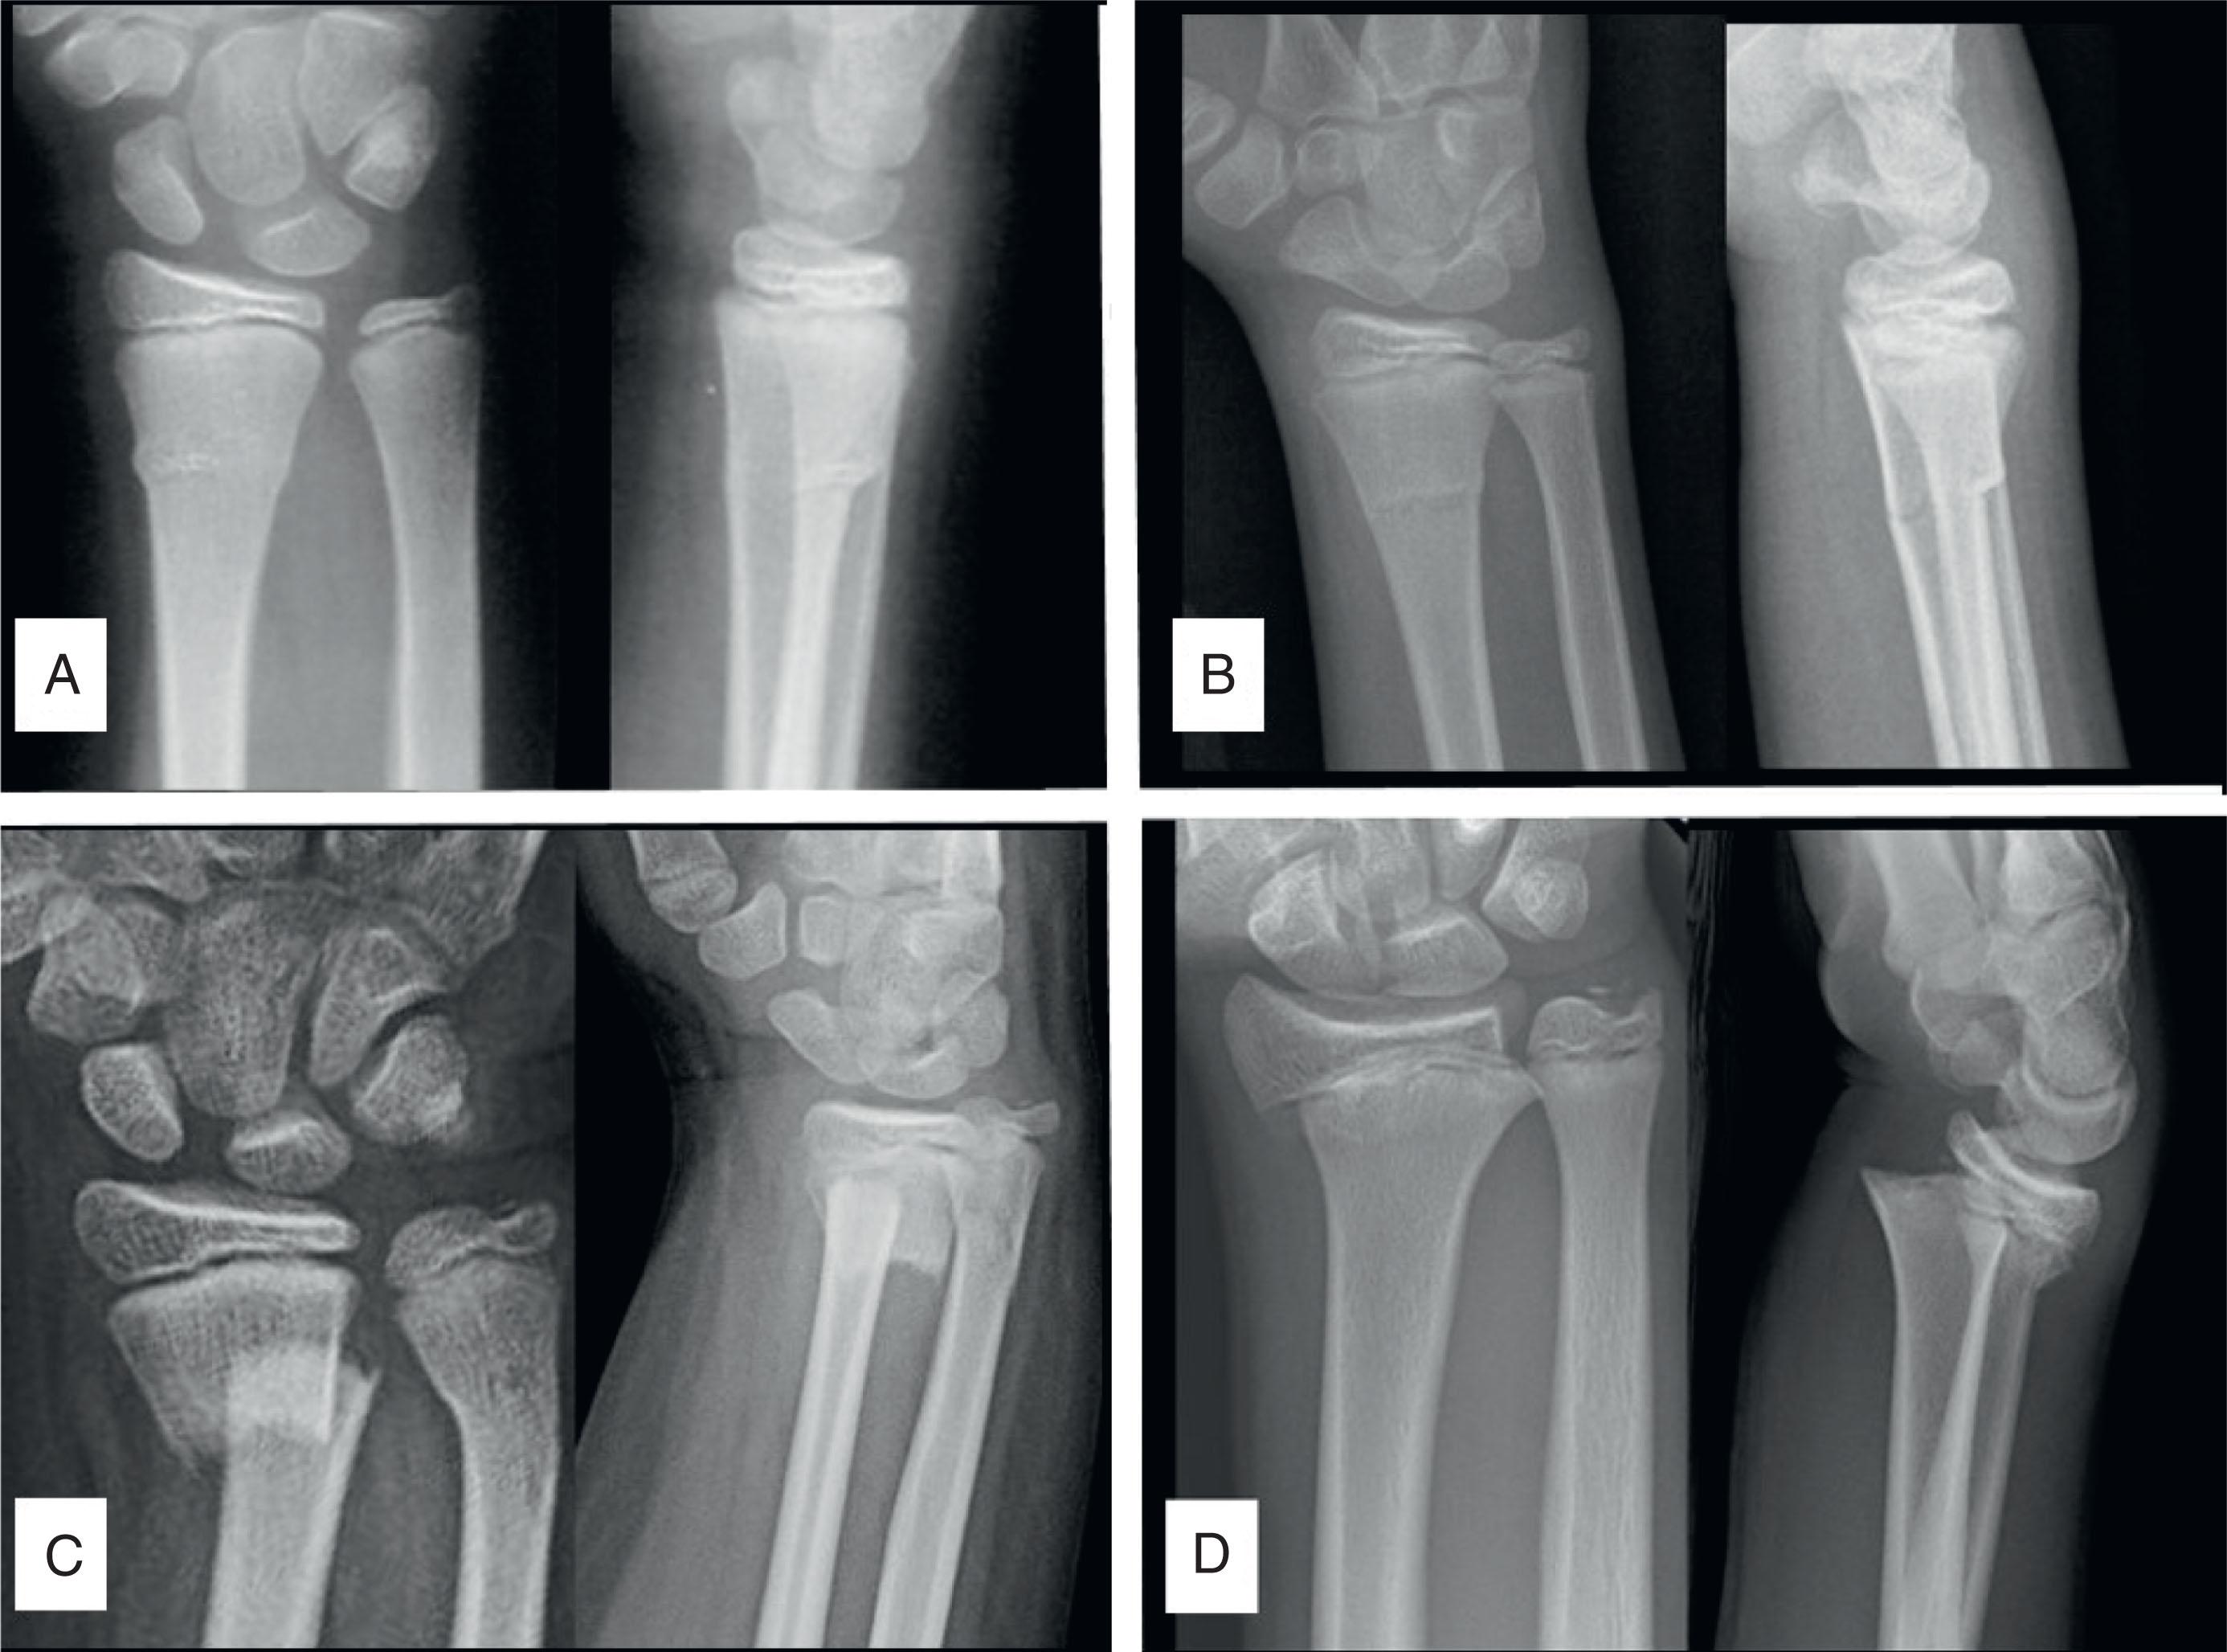 Fig. 6.2, Four Basic Distal Radius Fracture Types. (A) Buckle (aka torus) fracture. (B) Greenstick fracture. (C) Complete fracture. (D) Growth plate fracture.